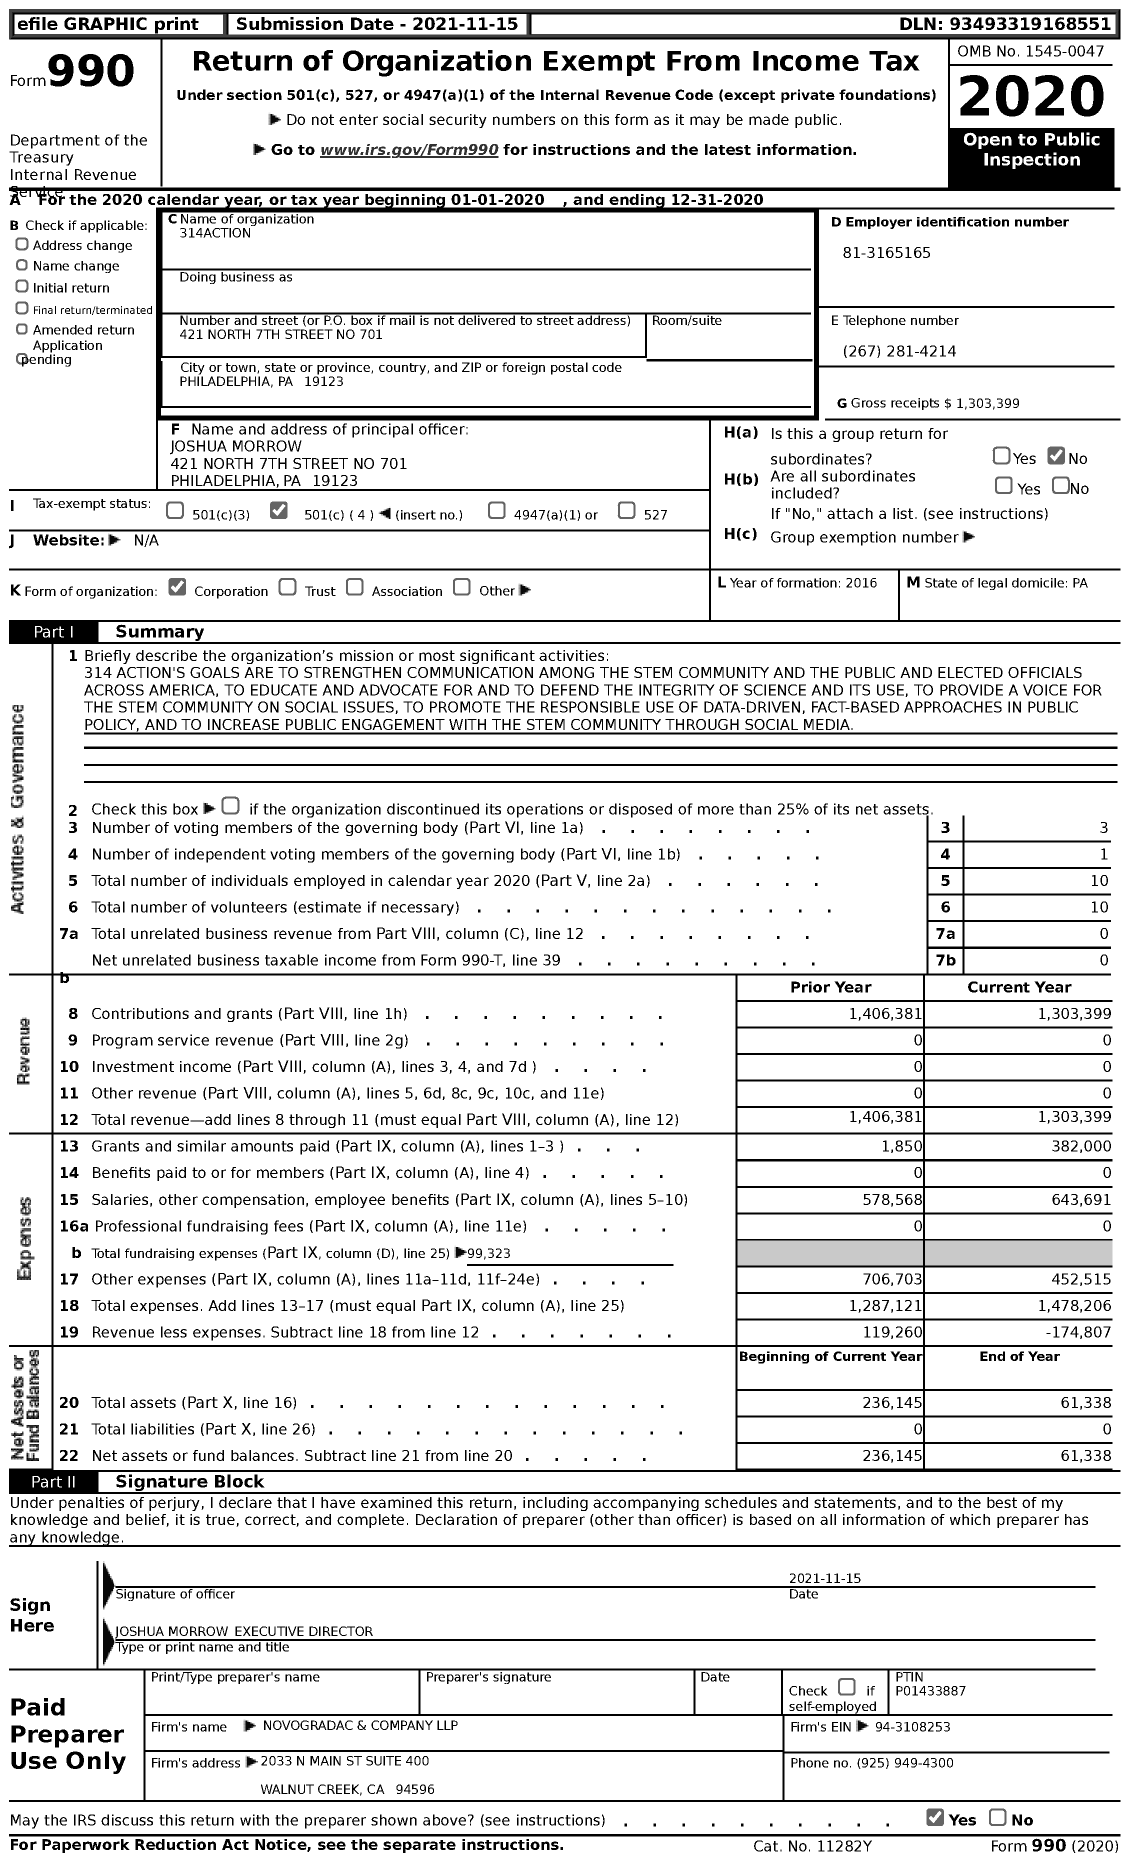 Image of first page of 2020 Form 990 for 314action